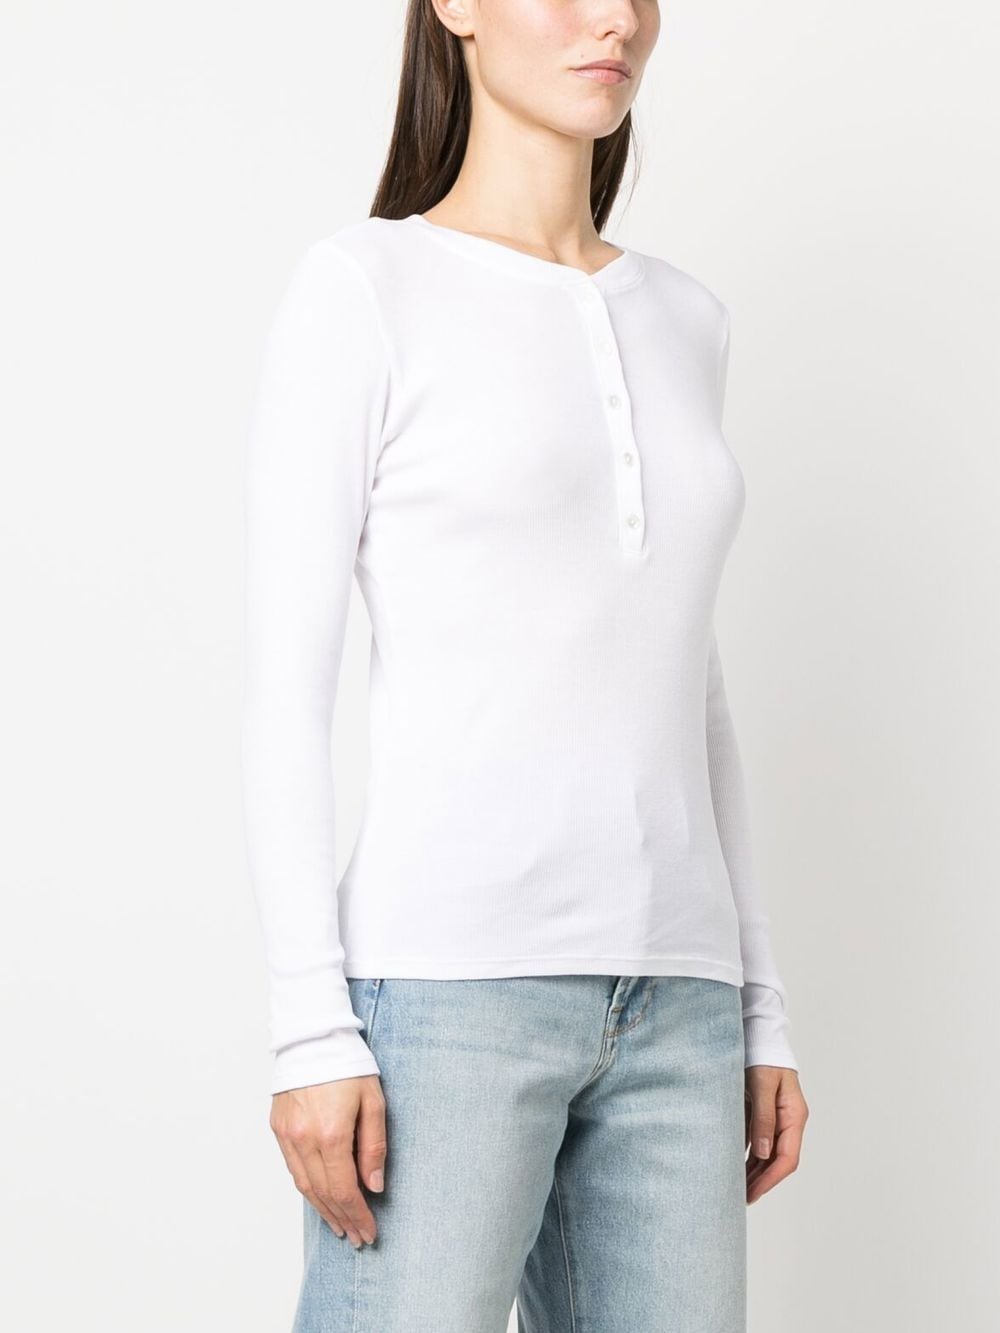 BUTTON-FRONT LONG-SLEEVED T-SHIRT